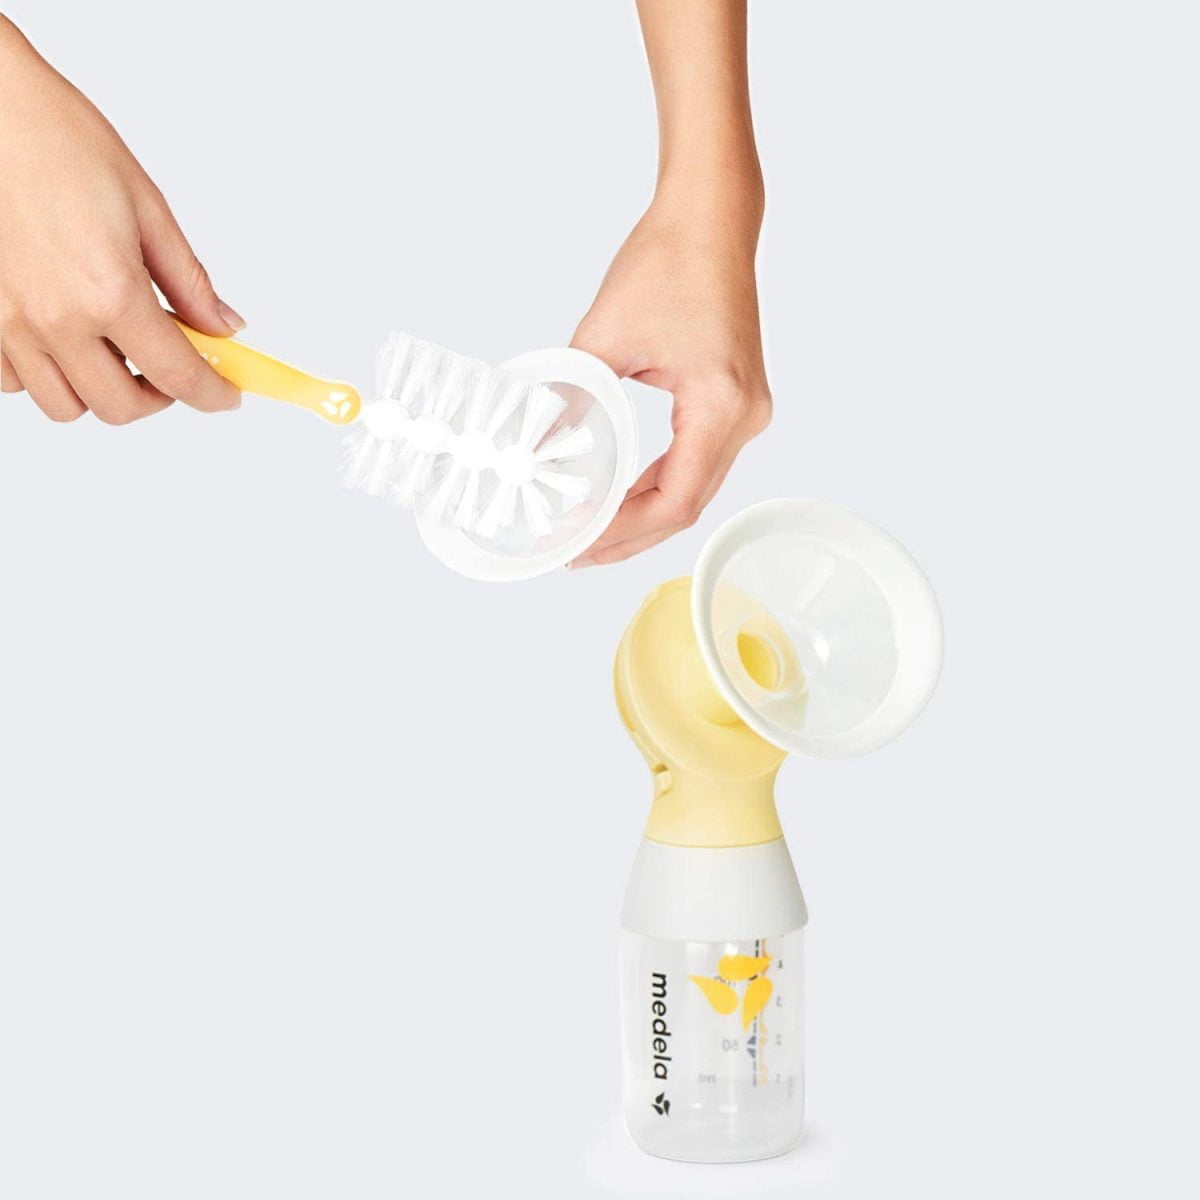 613Y9W4Kv5L. Ac Sl1500 Medela &Lt;H1 Class=&Quot;Mtop0&Quot;&Gt;Medela - Swing Maxi Flex Double Electric Breast Pump&Lt;/H1&Gt; Https://Www.youtube.com/Watch?V=6Jgwy593Of4 The Breast Pump Includes A Soft-Touch, Ergonomic Swivel Handle - To Utilise Our Research-Based, Patented 2-Phase Expression Technology. Through Research, Medela Has Learned That There Are Two Distinct Phases Of How Babies Breastfeed. The First Phase, Known As The Stimulation Phase Is When The Baby First Goes To The Breast And Sucks Fast To Initiate The Milk Flow. The Second Phase Of Expression Occurs After Milk Flow Or Let-Down Begins. During This Phase, The Baby Breastfeeds At A Slower Suck Rate For Continued Milk Flow. At Medela, We Integrated This Natural Sucking Behaviour Into Our Breast Pumps To Create Harmony The First Manual Breast Pump To Offer 2-Phase Expression Technology. Harmony'S Single Vacuum Manual Settings Are Easy To Adjust, Making The Pumping Experience Convenient And More Comfortable. Mothers Have The Flexibility To Switch Between The Modes By Adjusting The Handle. This Is The Key To Efficient Breast Pumping And A Major Reason Why Medela Is The Leading Breast Pump Recommended By Doctors For New Mothers. Mothers Can Significantly Reduce The Time Taken To Express Because The Milk Flows Faster And More Easily. &Lt;Pre&Gt;&Lt;B&Gt;We Also Provide International Wholesale And Retail Shipping To All Gcc Countries: Saudi Arabia, Qatar, Oman, Kuwait, Bahrain. Warranty: Pump - 1 Year, Battery - 6 Months&Lt;/B&Gt;&Lt;/Pre&Gt; Breast Pump Medela Swing Maxi Flex Double Electric Breast Pump